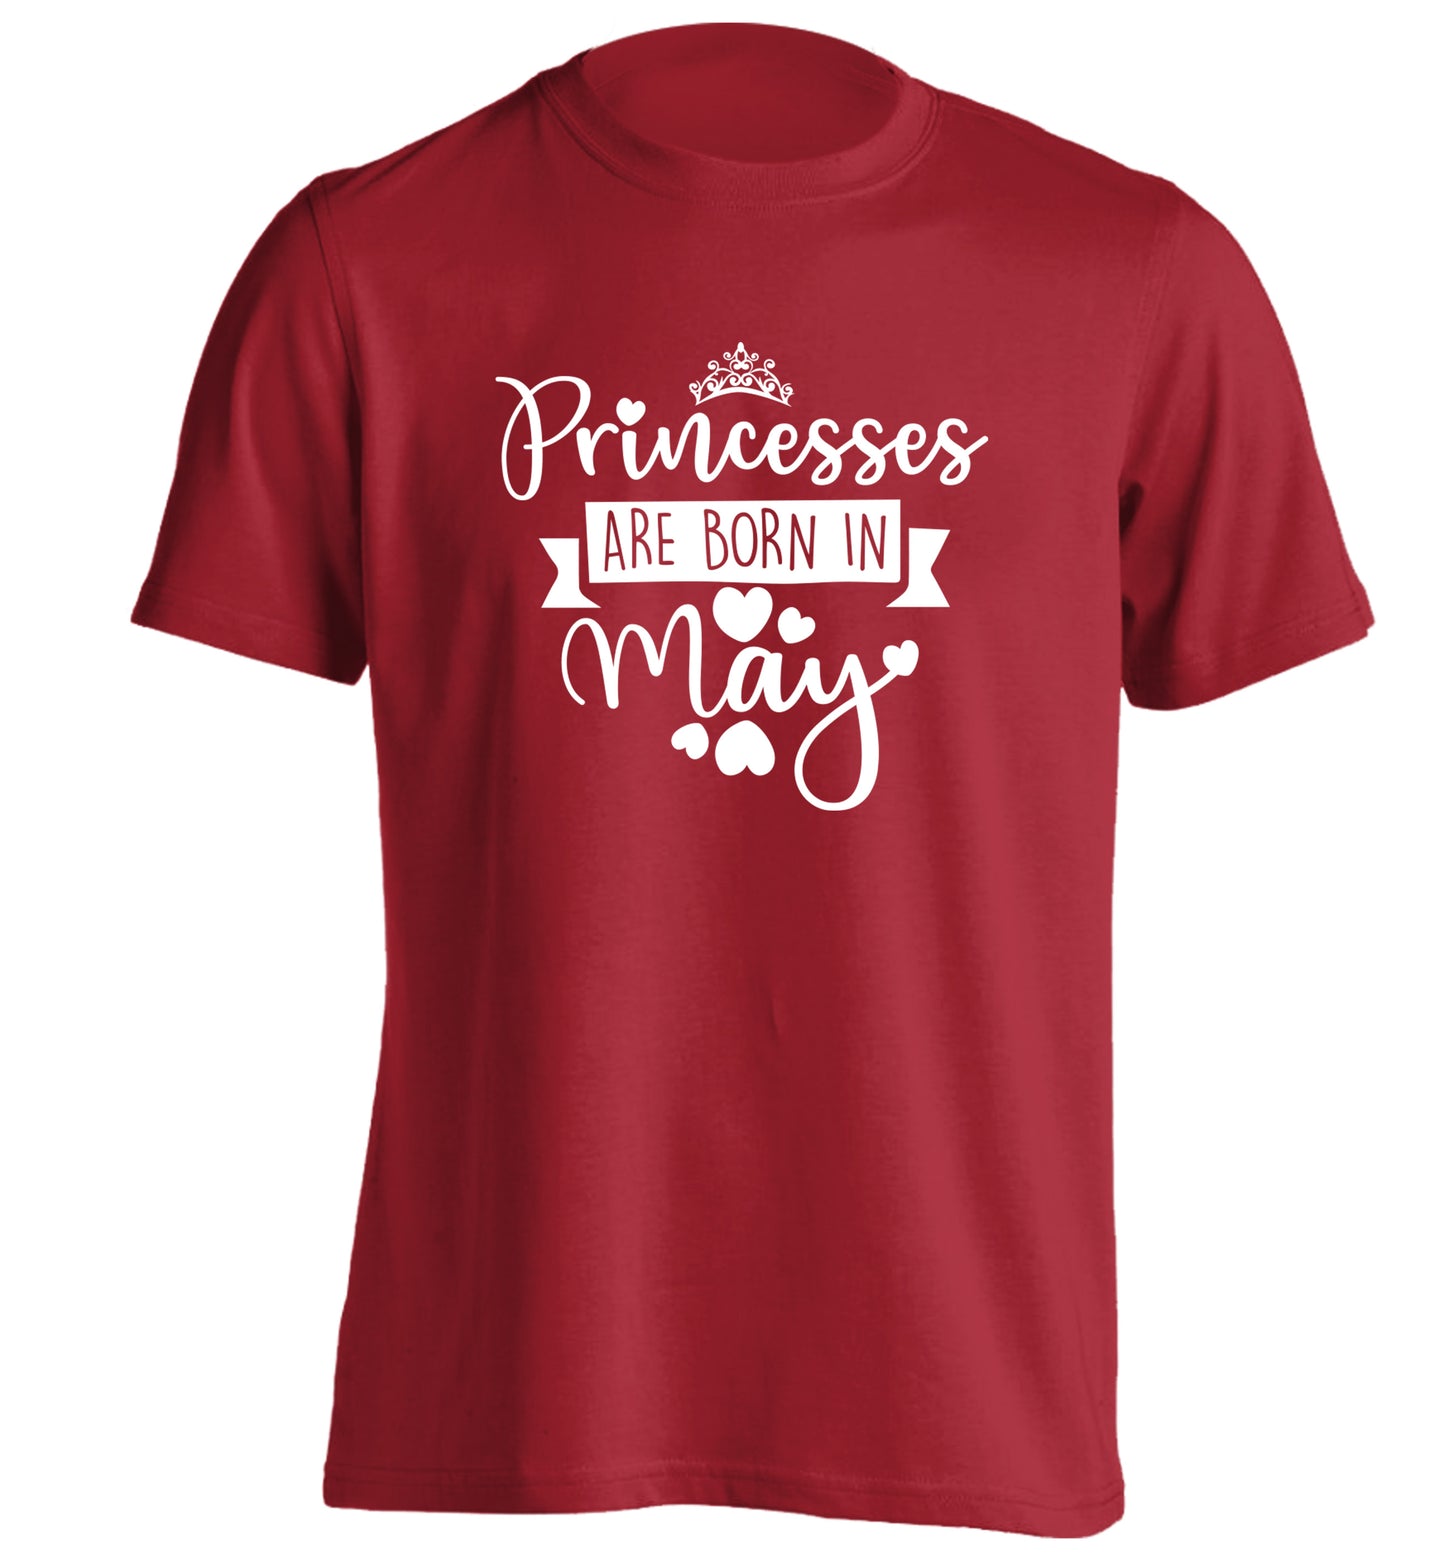 Princesses are born in May adults unisex red Tshirt 2XL